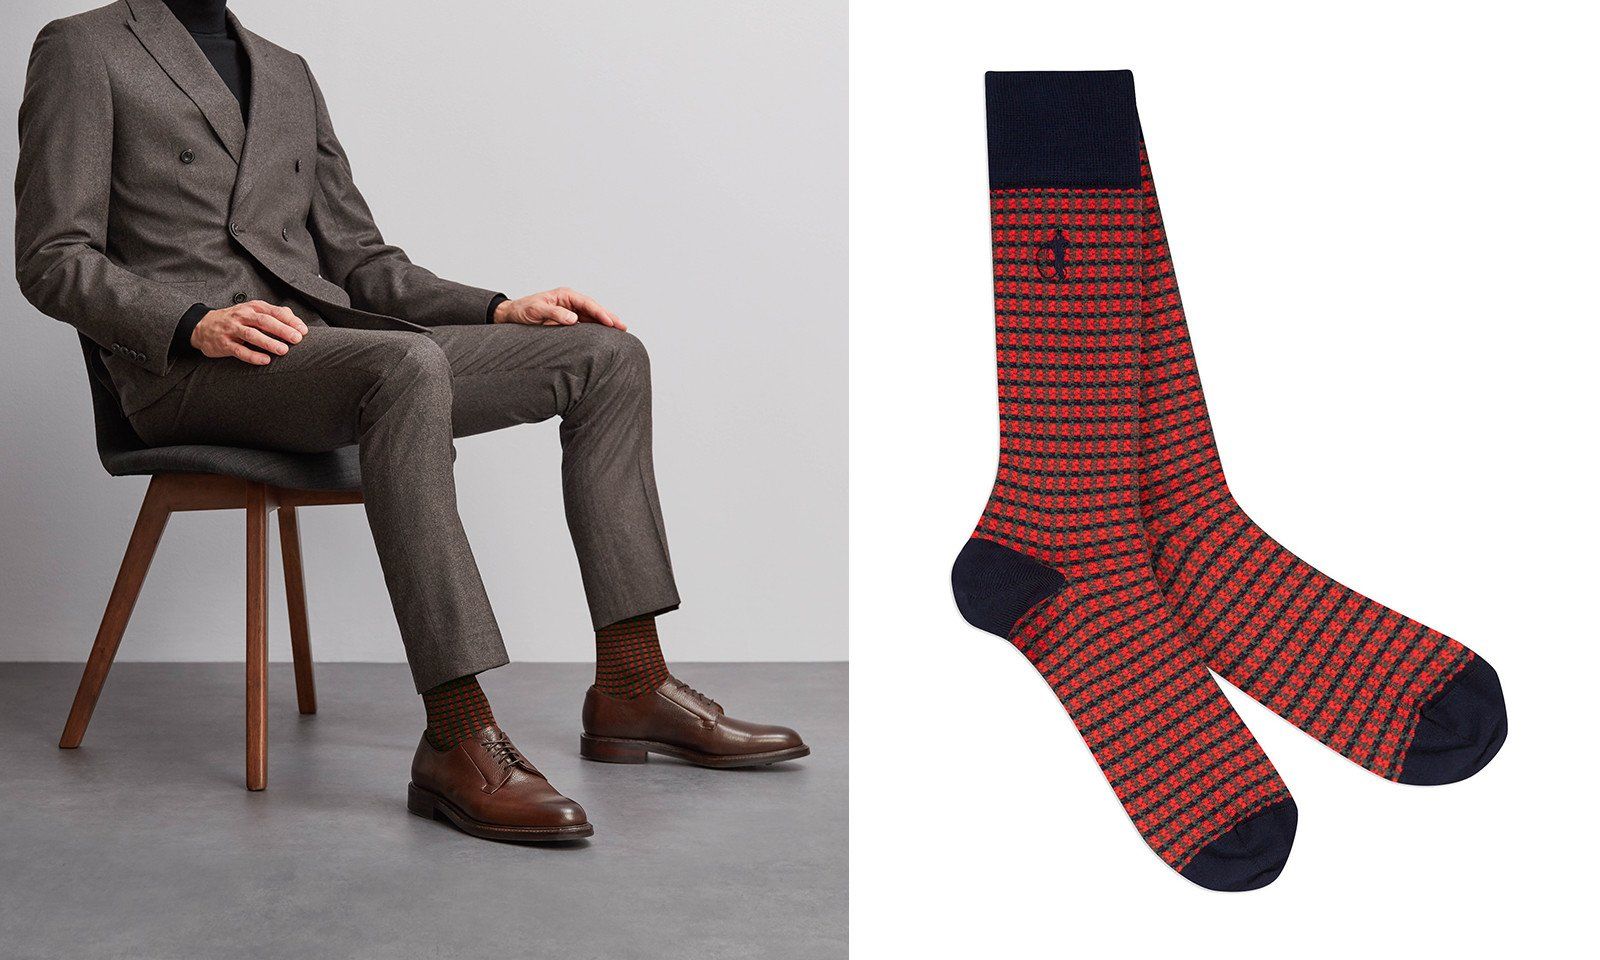 Red socks with houndstooth pattern: Shaken and Stirred